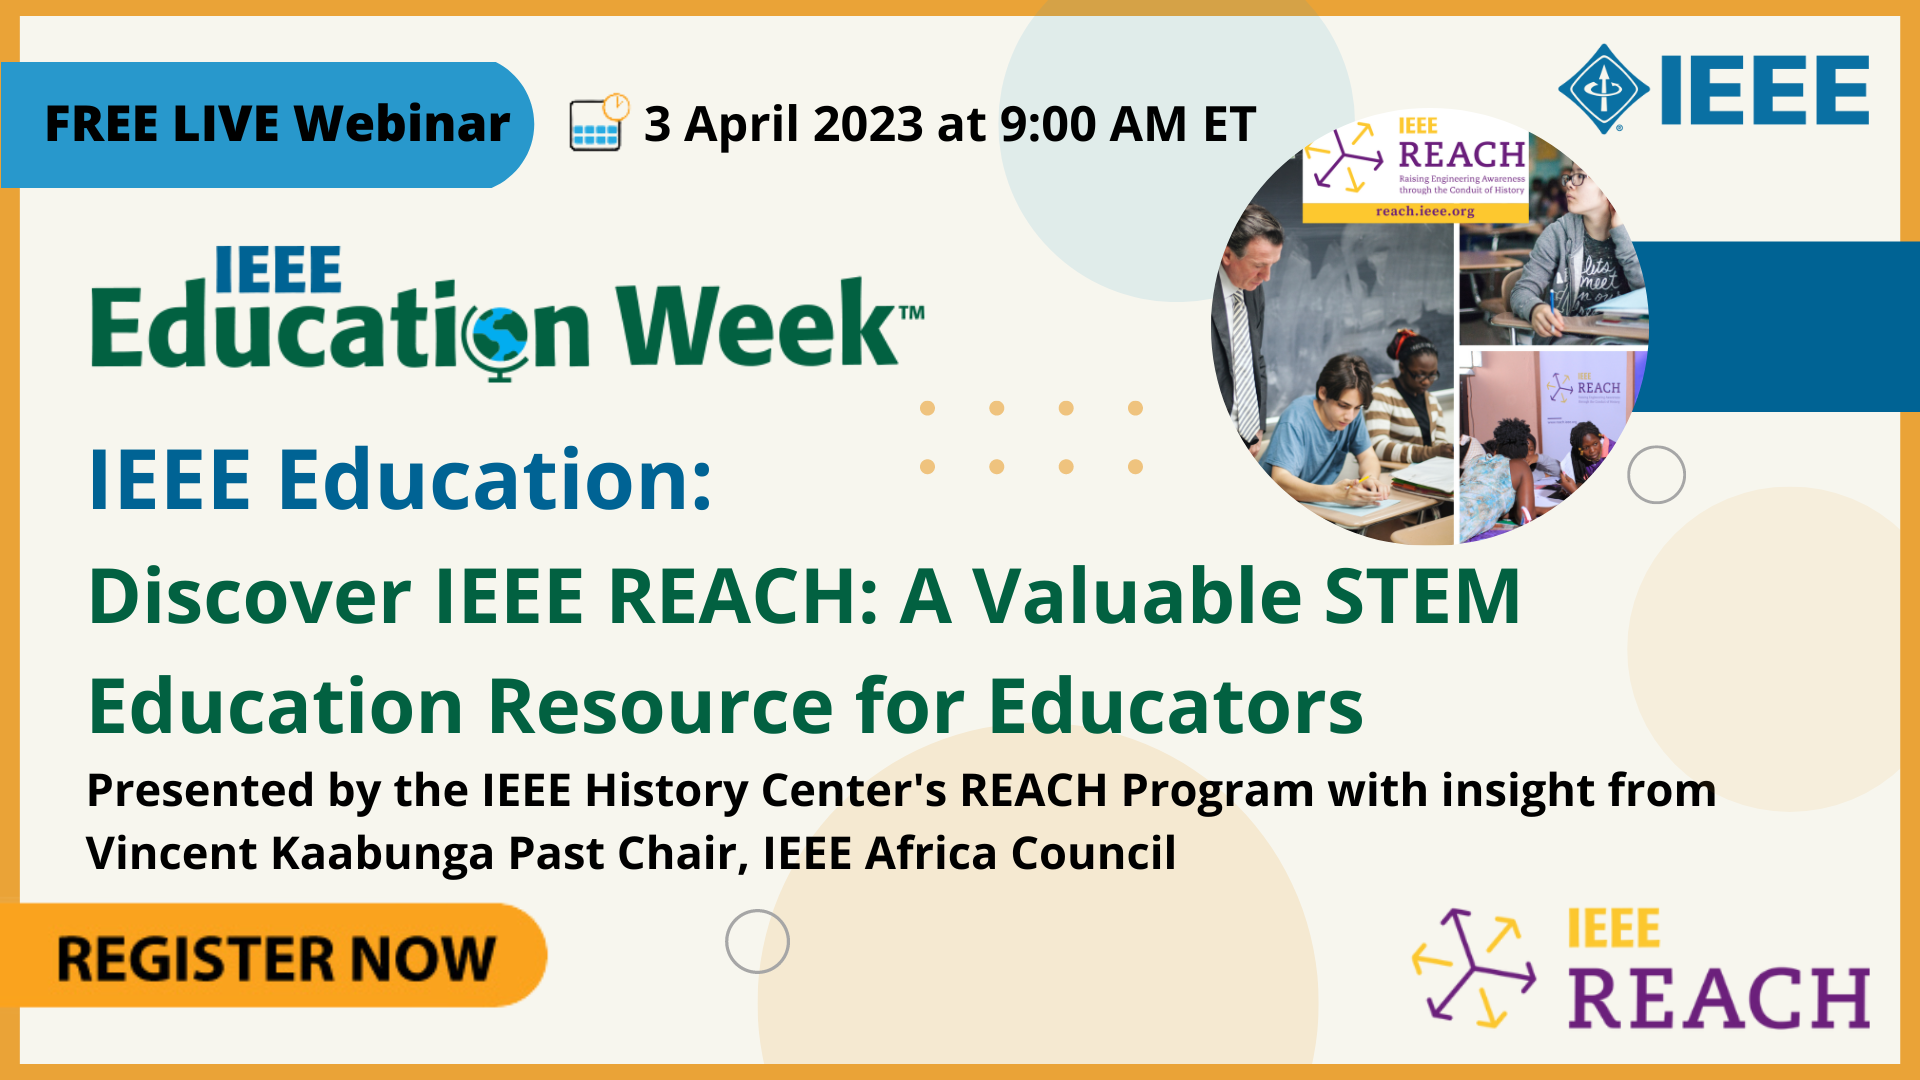 Discover IEEE REACH: A Valuable STEM Education Resource for Educators